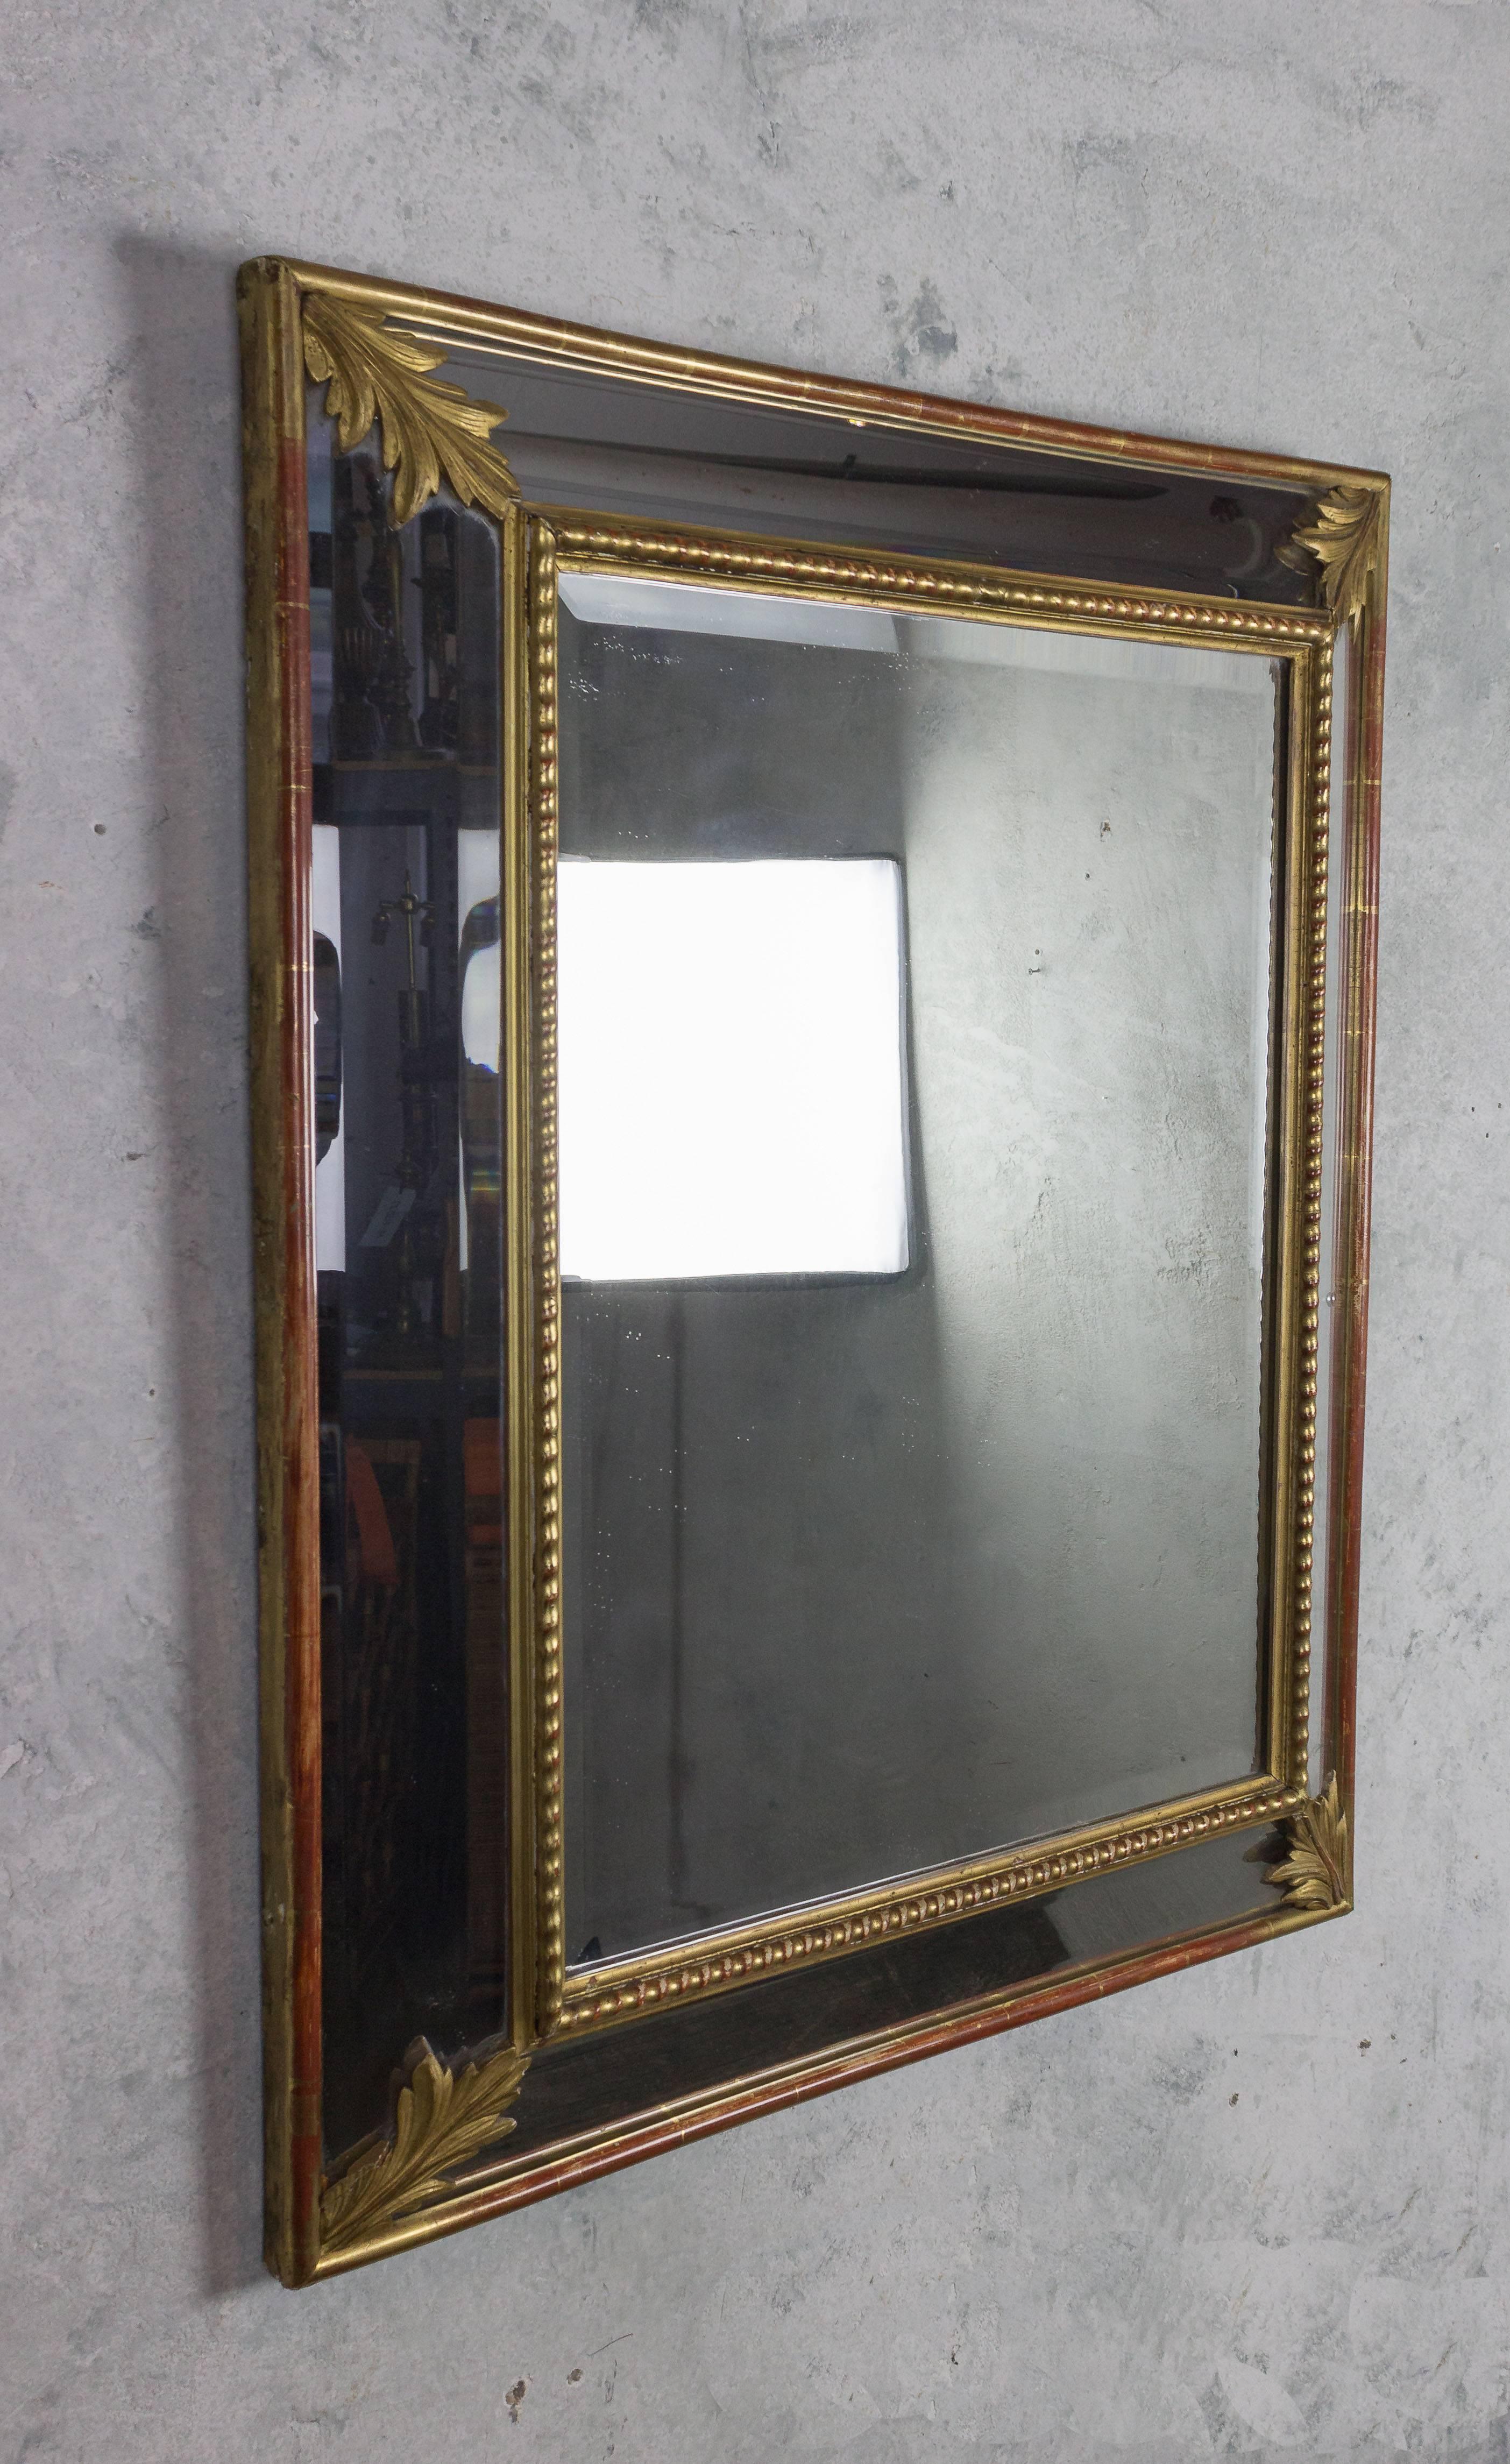 Elegant French carved and beveled giltwood mirror with inset mirrored panels.